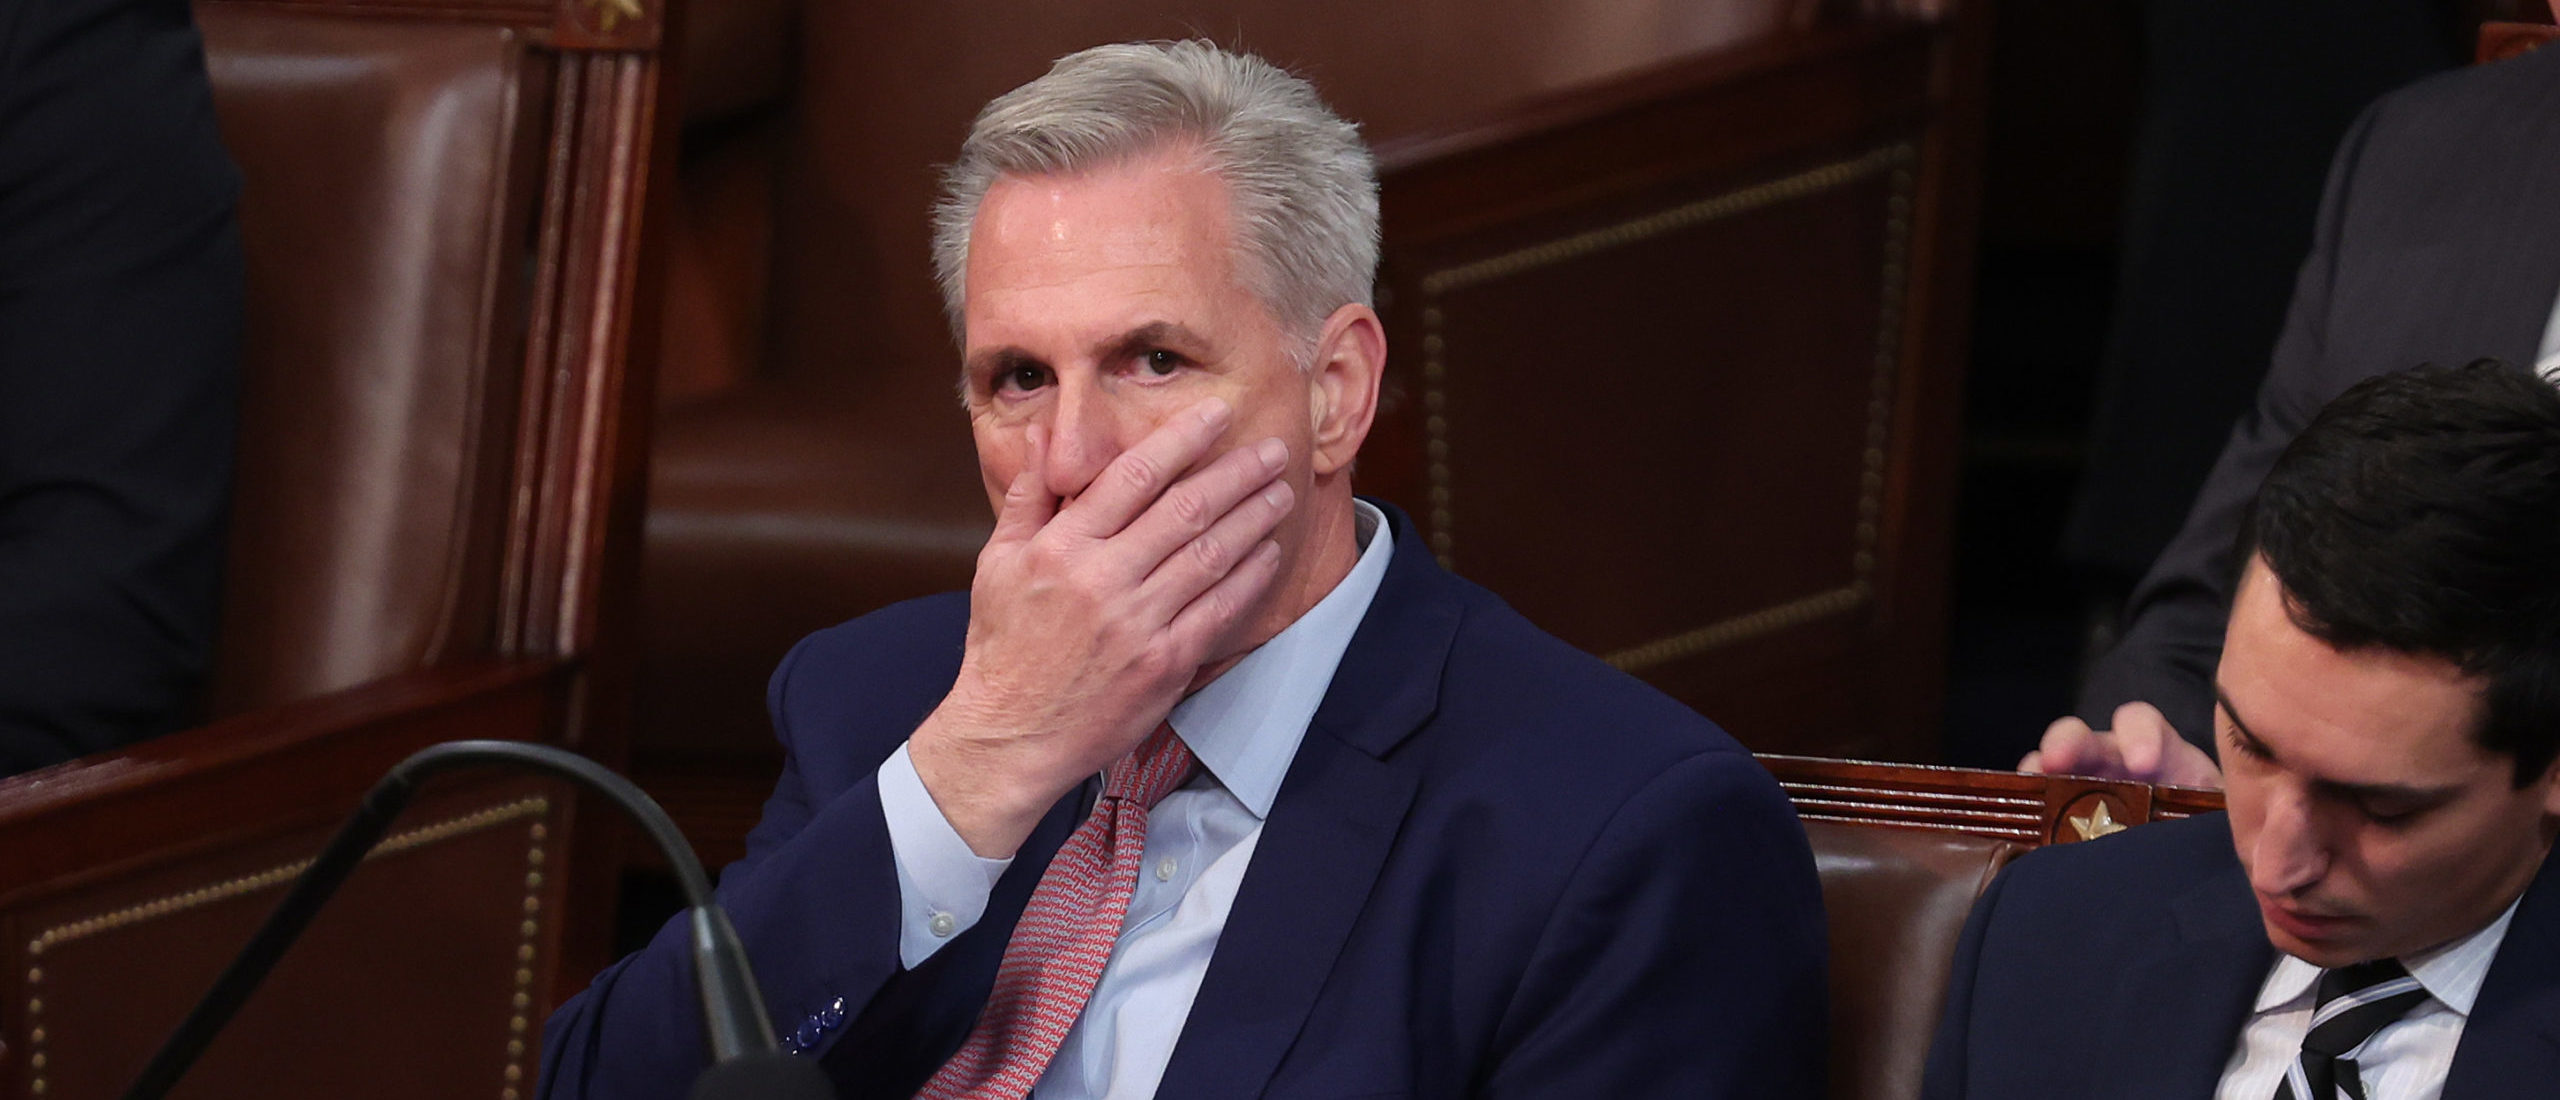 WASHINGTON, DC - JANUARY 03: U.S. House Minority Leader Kevin McCarthy (R-CA) reacts as Representatives cast their votes for Speaker of the House on the first day of the 118th Congress in the House Chamber of the U.S. Capitol Building on January 03, 2023 in Washington, DC. Today members of the 118th Congress will be sworn-in and the House of Representatives will elect a new Speaker of the House. (Photo by Win McNamee/Getty Images)